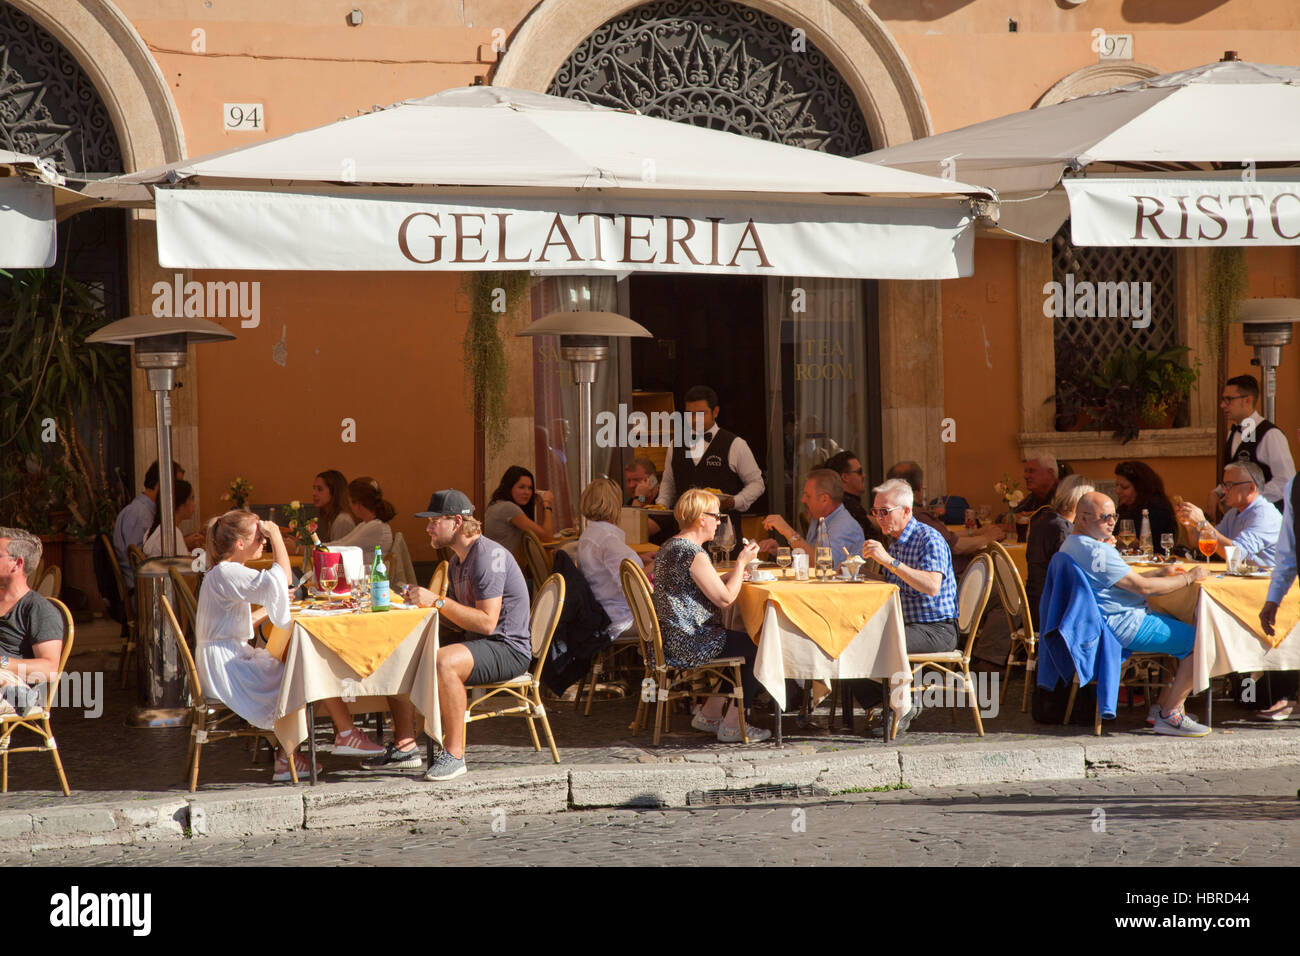 Piazza Navona, Rome, tourists dining at restaurant al fresco in the sunshine, with waiters Stock Photo